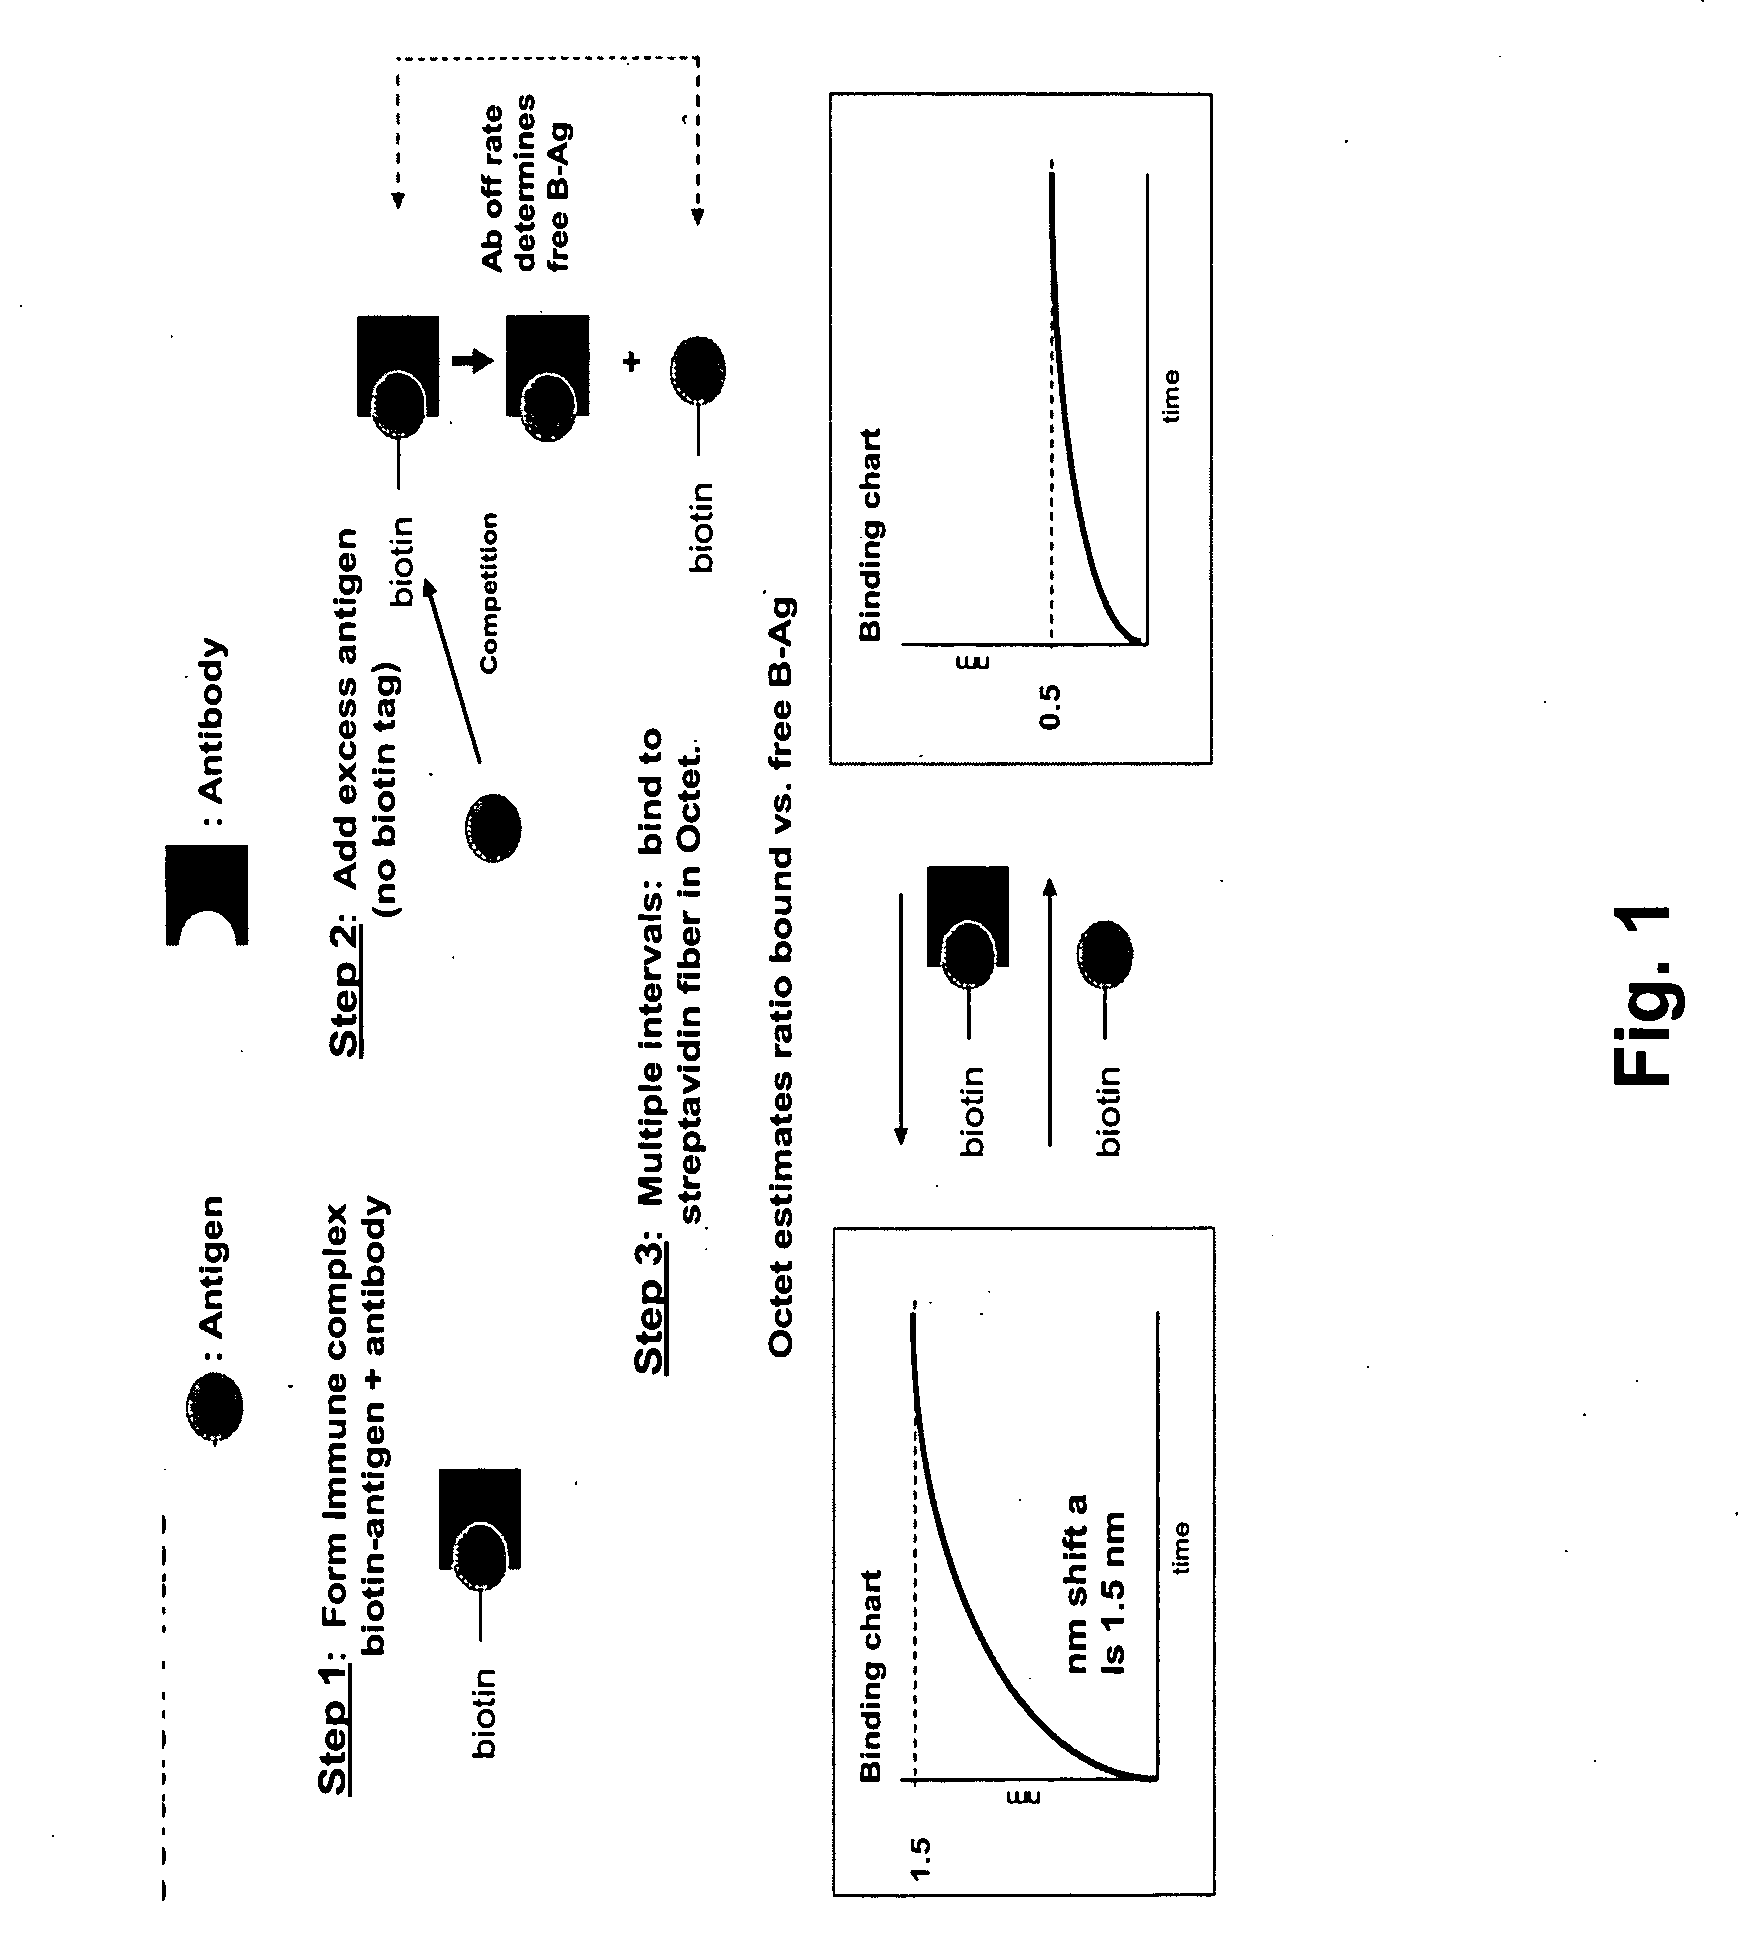 Methods for characterizing molecular interactions